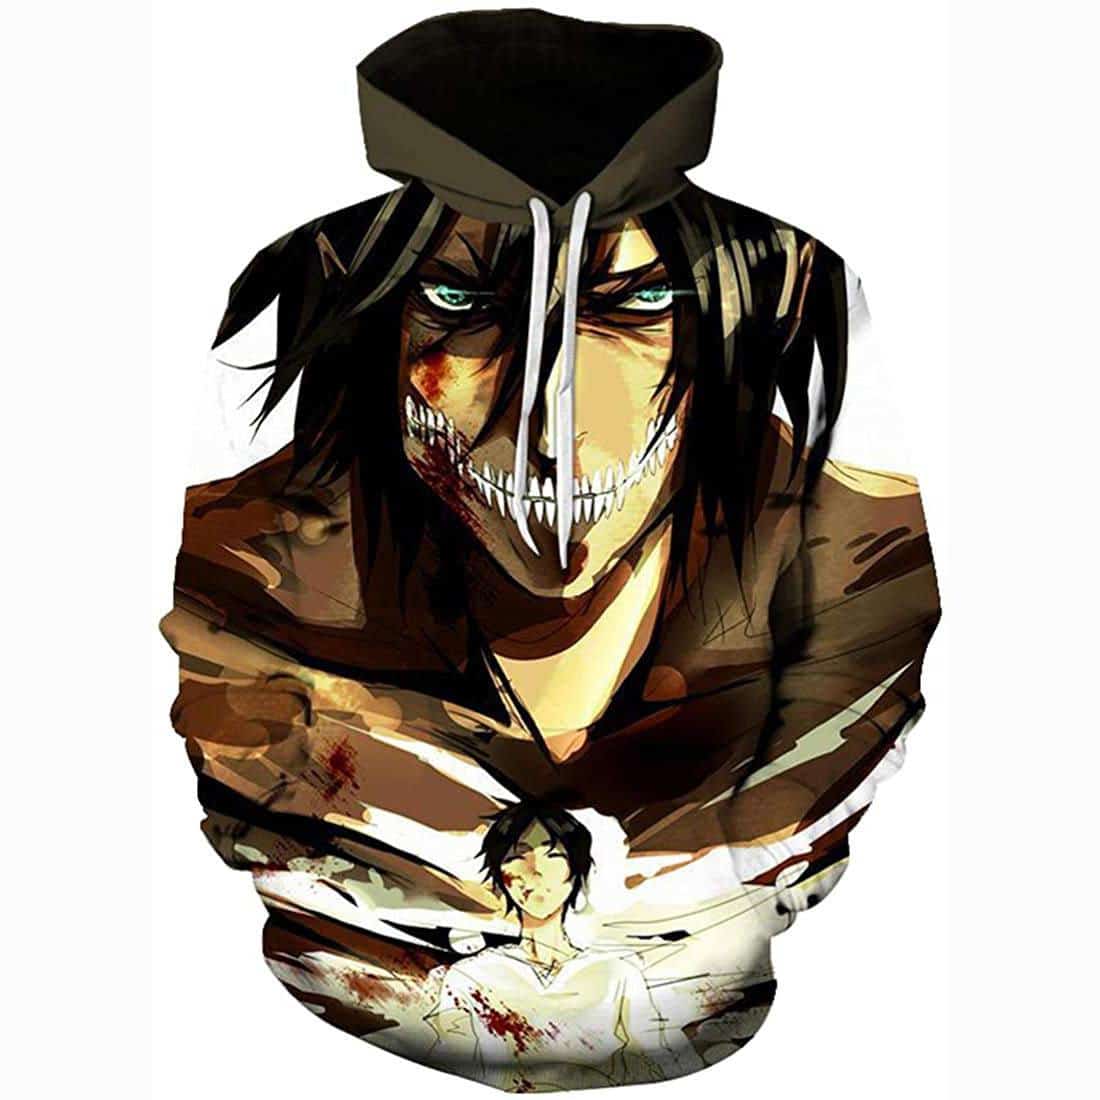 Attack on Titan Hoodie 3D Print Manga Anime Pullover Hoodie Sweatshirt with Front Pocket